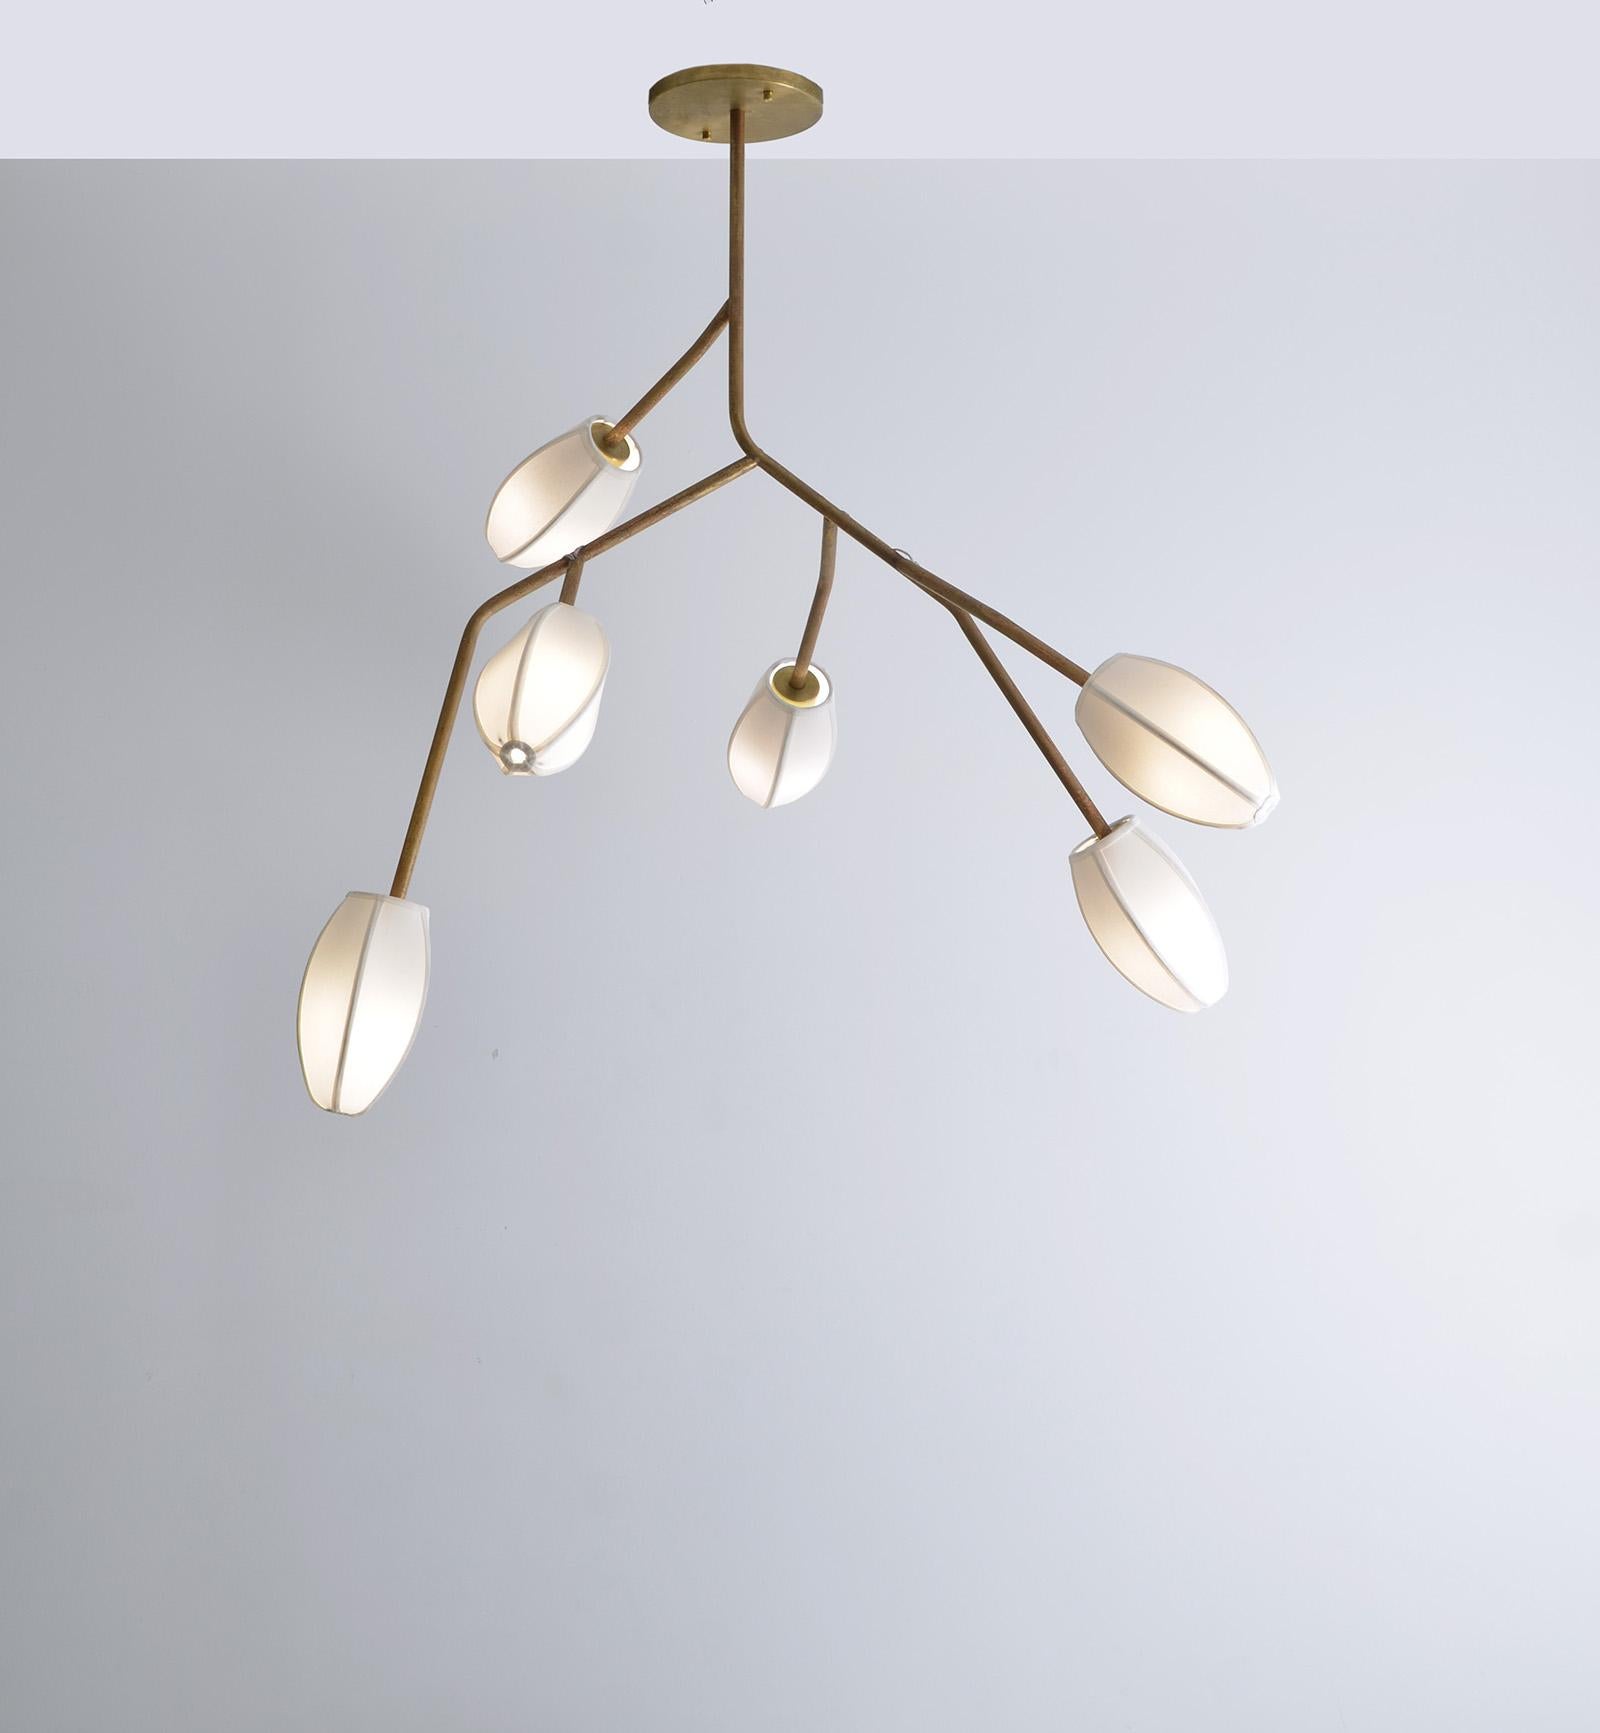 Brazilian sculptural wall lamp in brass with natural finish without varnish. The brass darkens over time. Small cotton domes in various colors.

Its design refers to cherry trees with buds. 
E27 lamp little ball lamp. 
Follows without bulb lamp.
